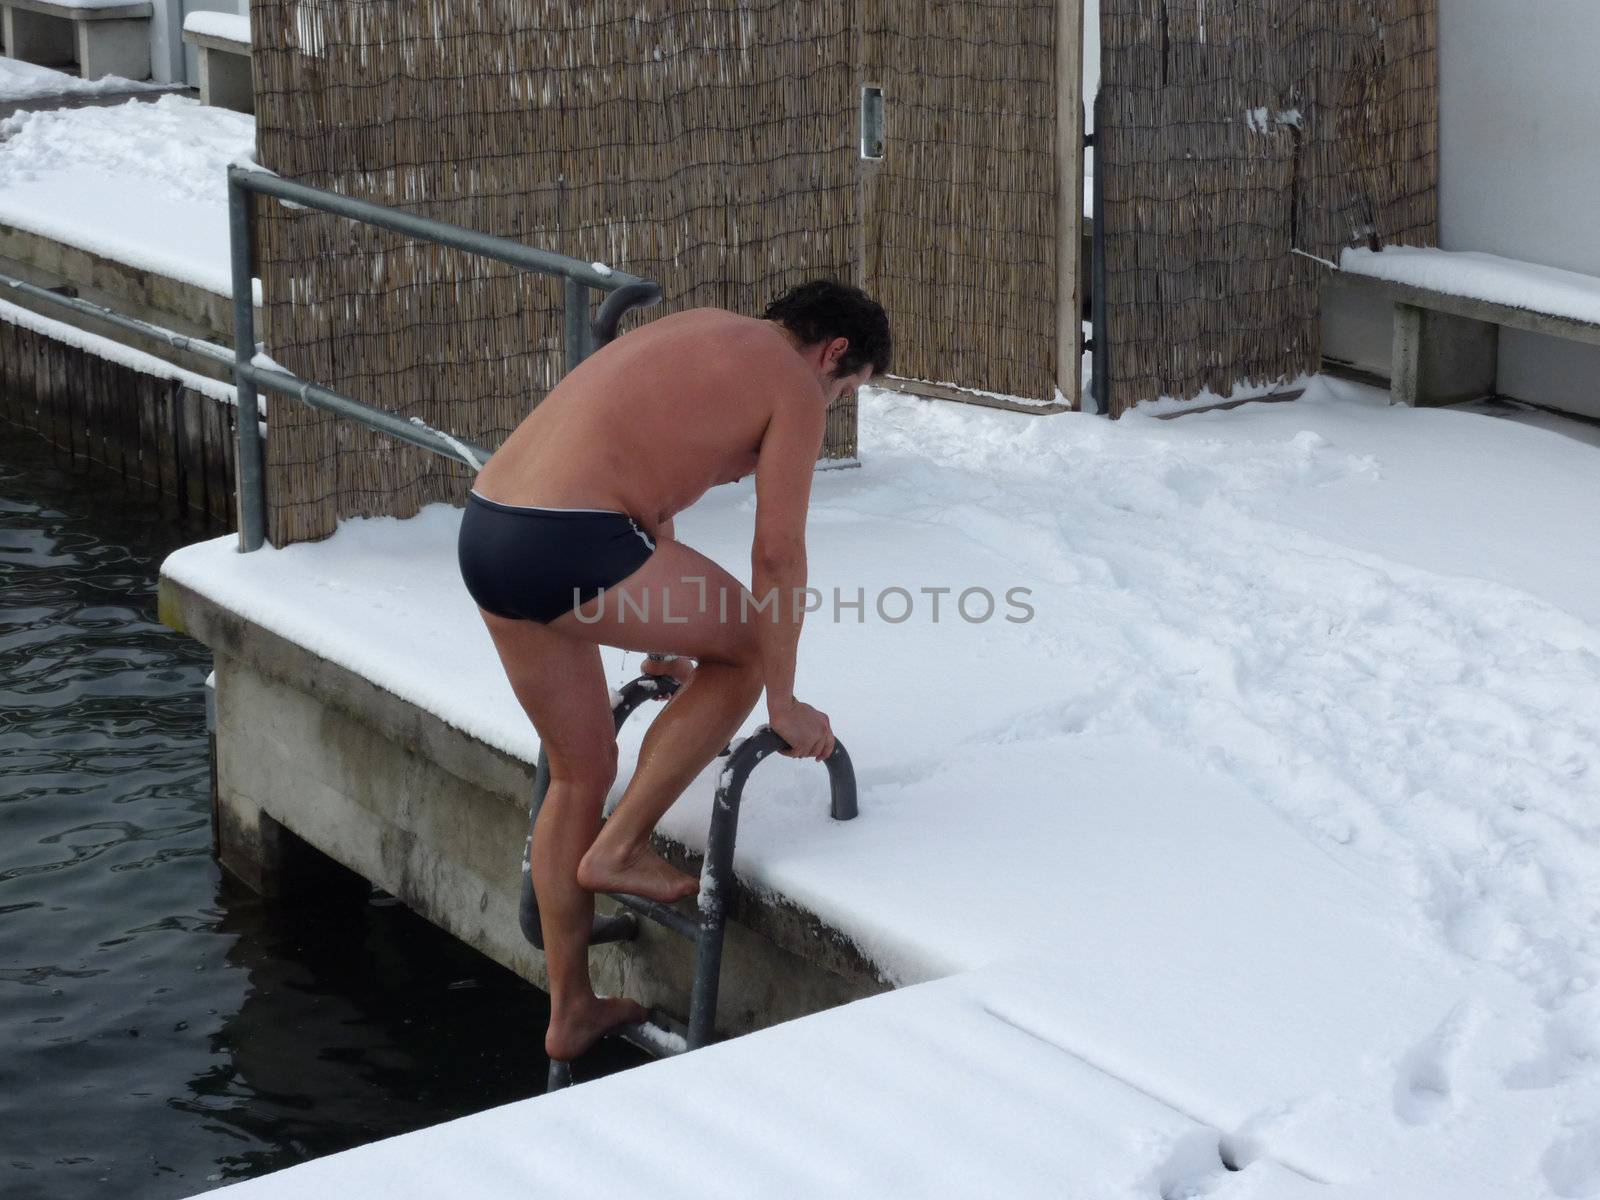 Swimmer getting out of the lake water by a ladder during winter time